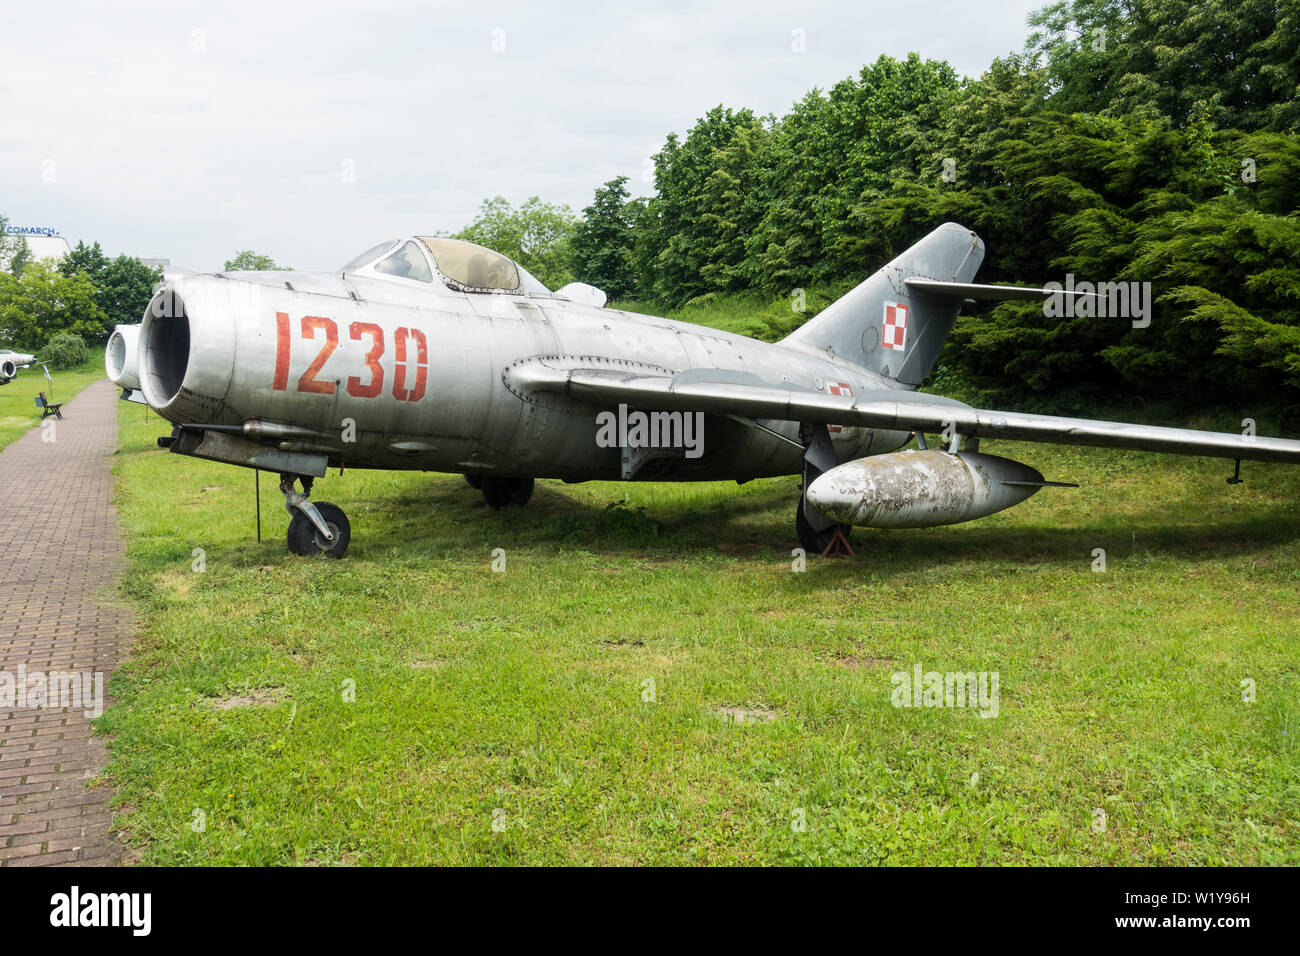 WSK LIM-2 Polish Fighter Aircraft from the 1950s, Krakow Aircraft Museum, Krakow, Poland, Europe. Stock Photo